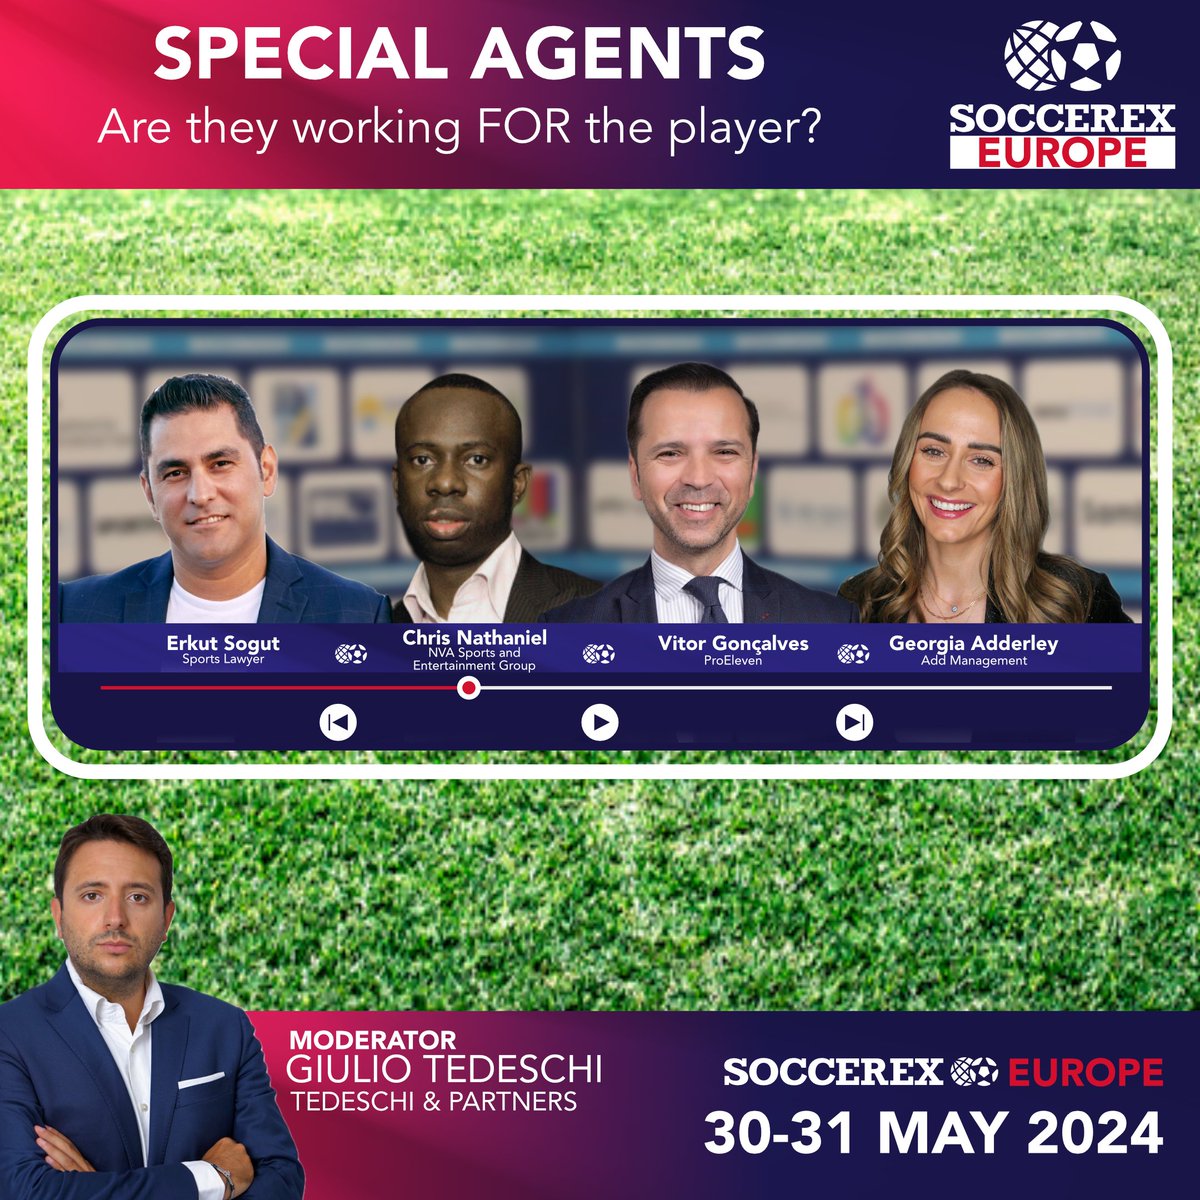 We are less than 50 days away from welcoming top speakers and guests to #soccerexeurope, this May 30th - 31st, at the @cruijffarena! Panellists include: 🗣️ Erkut Sogut 🗣️ Chris Nathaniel 🗣️ Vitor Gonçalves 🗣️ Georgia Adderley 🎙️ Moderated by @CeoTedeschi